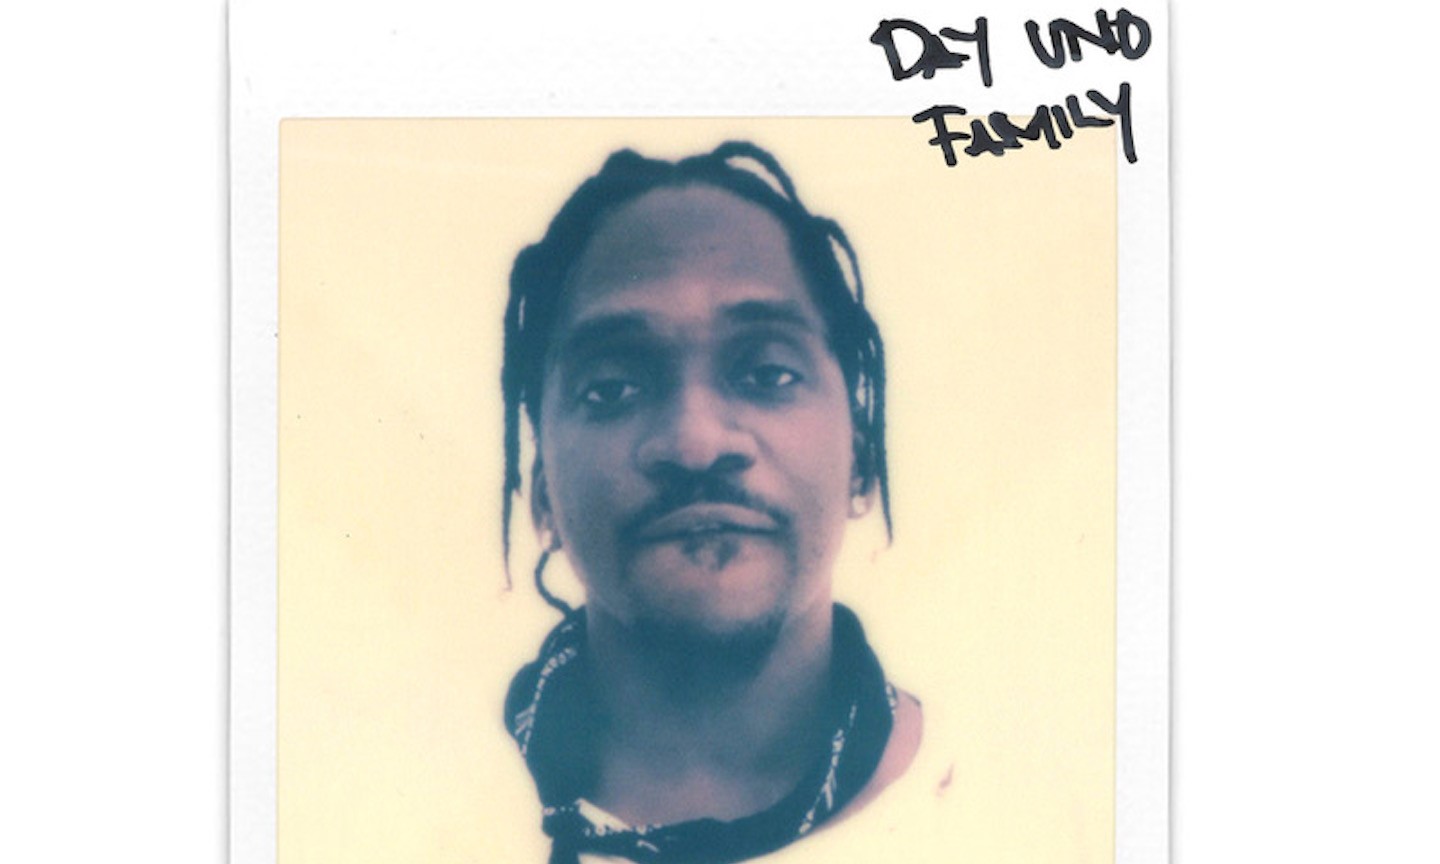 Pusha T and Nigo team up in new single ‘Hear Me Clearly’